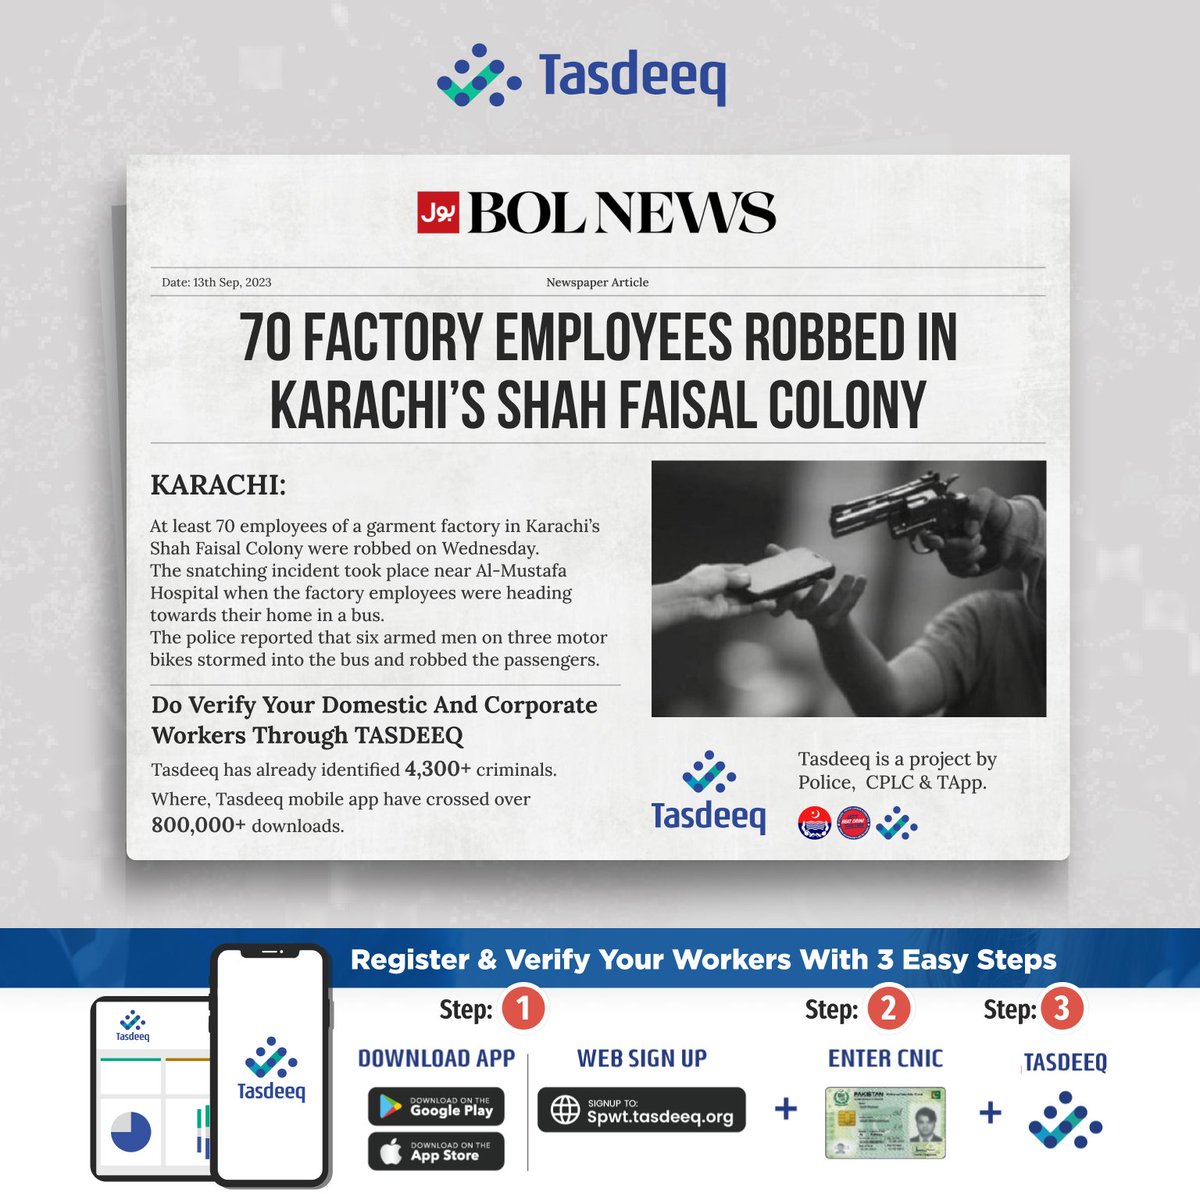 🚨 Security Matters! 🚨 The recent robbery of 70+ factory employees in Karachi highlights the pressing need for enhanced safety. Tasdeeq offering advanced verification services not only for workers. Strengthen your security with Tasdeeq. 🛡️ #KarachiSafety #BackgroundVerification